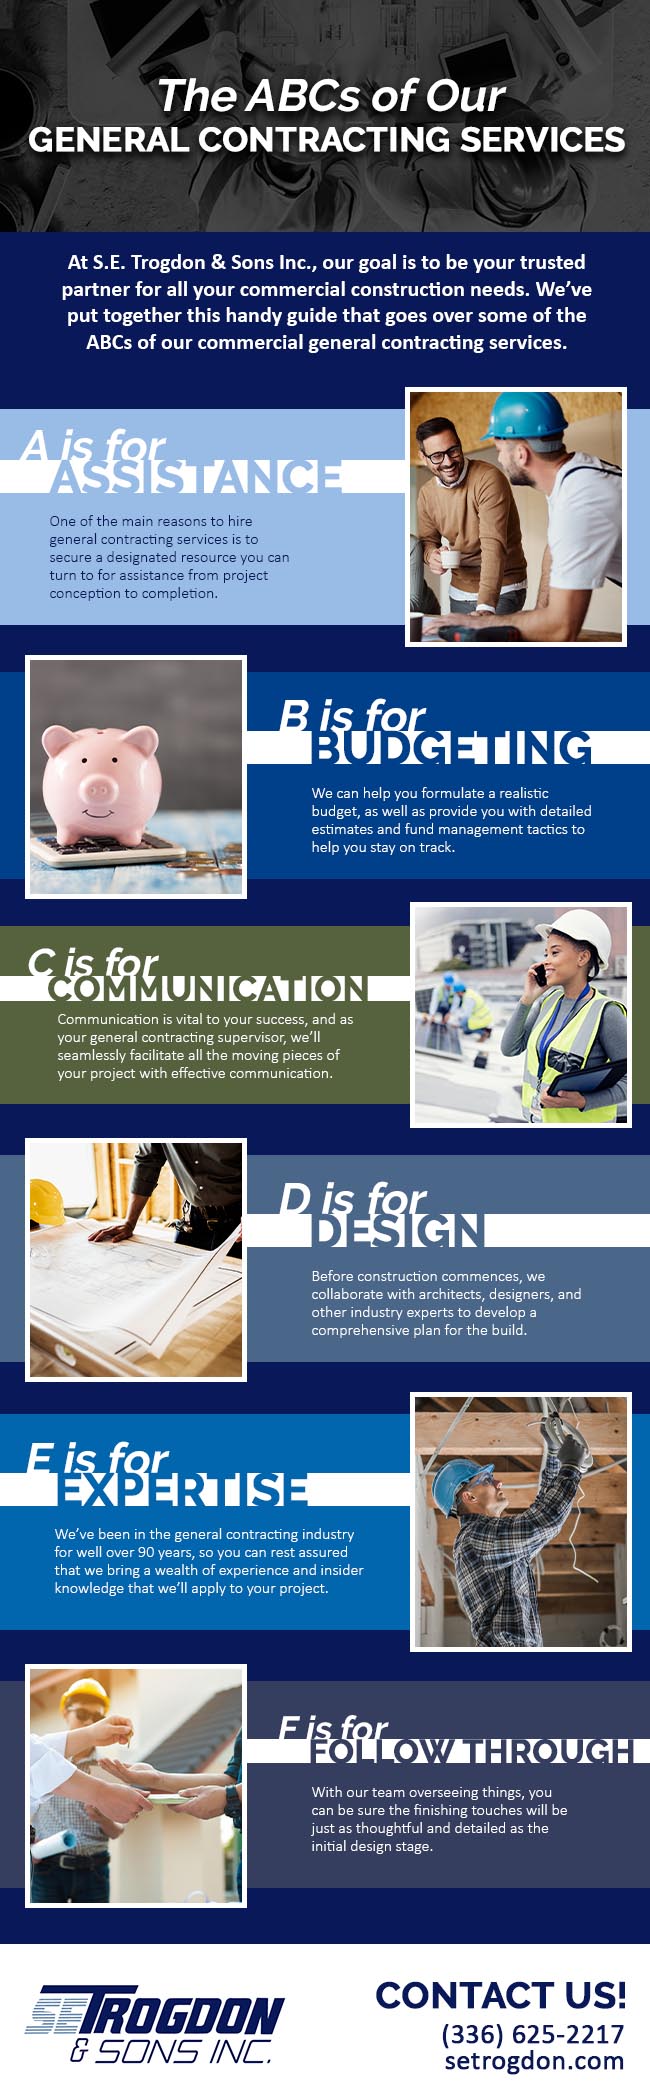 The ABCs of Our General Contracting Services